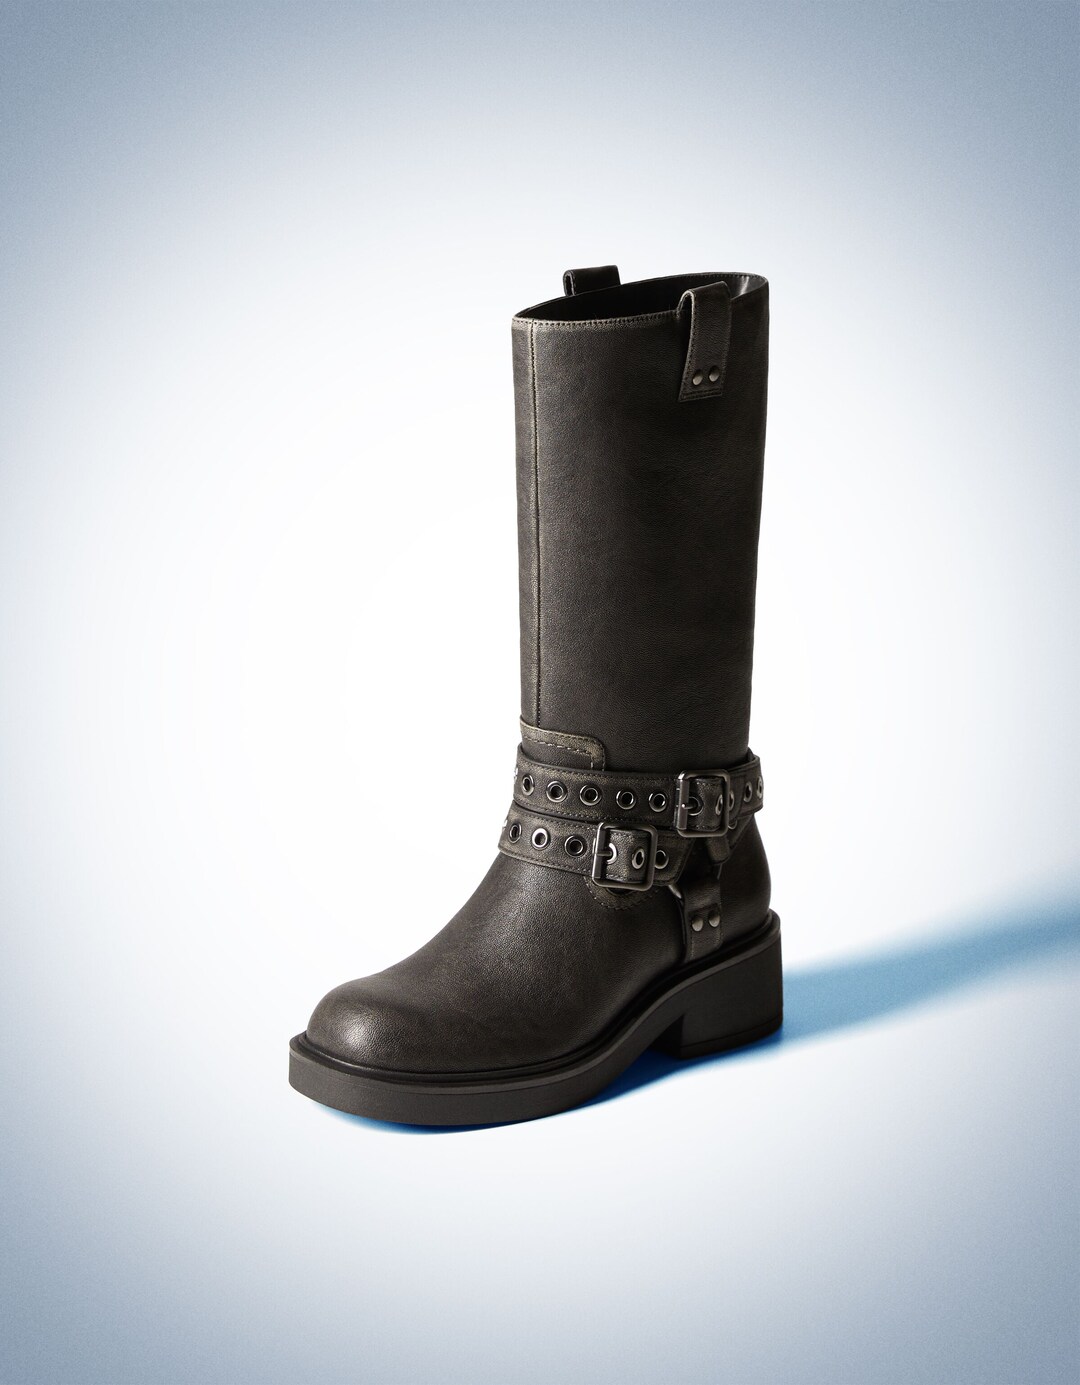 Biker boots with buckles and eyelets